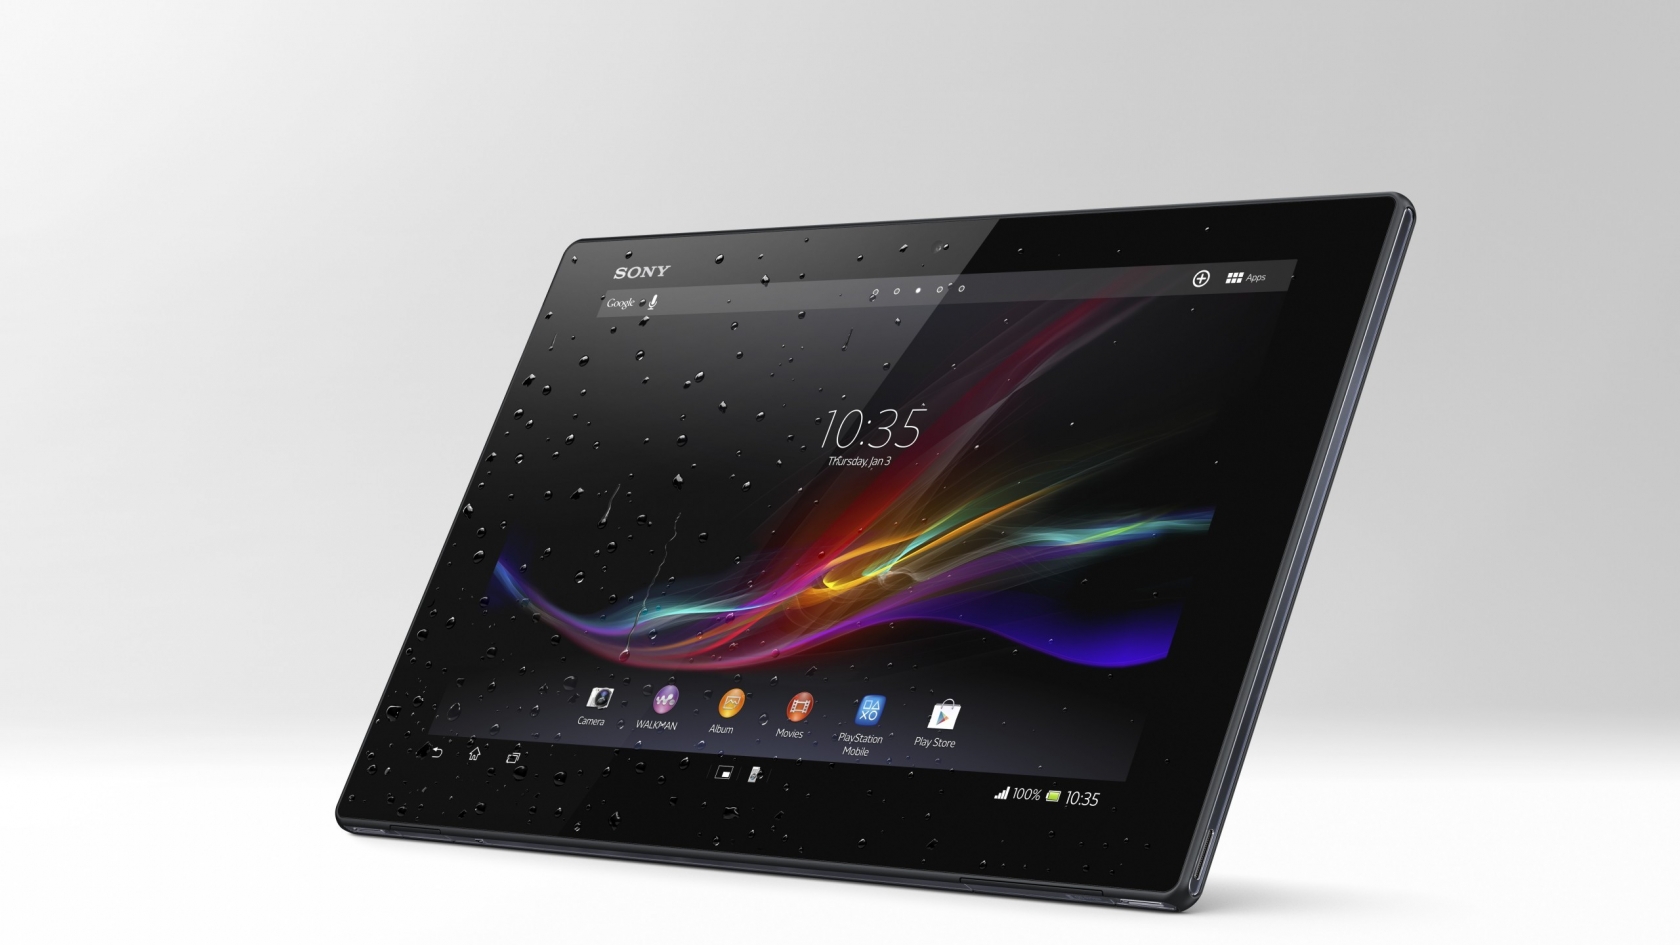 New Sony Xperia Z Tablet for 1680 x 945 HDTV resolution